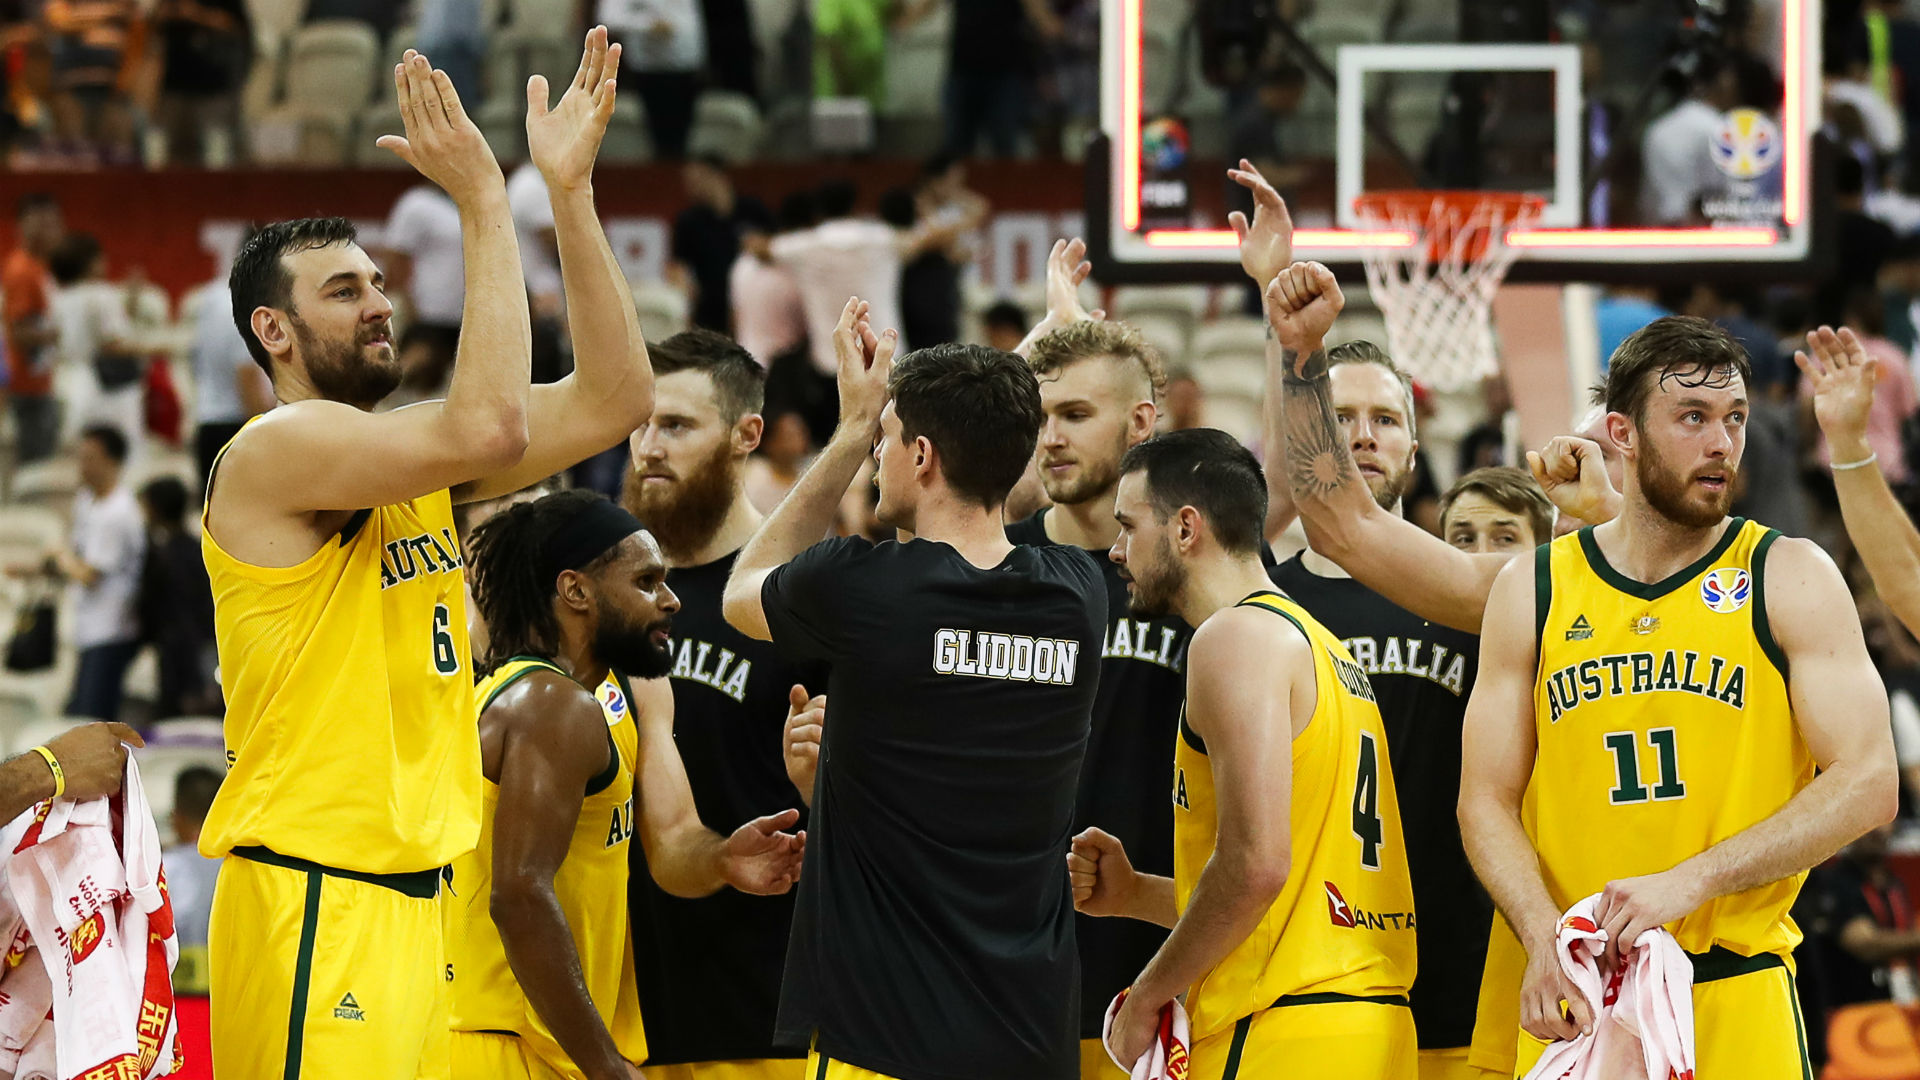 Australia and Spain will do battle for a place in the FIBA World Cup final after the Boomers beat Czech Republic to make history.